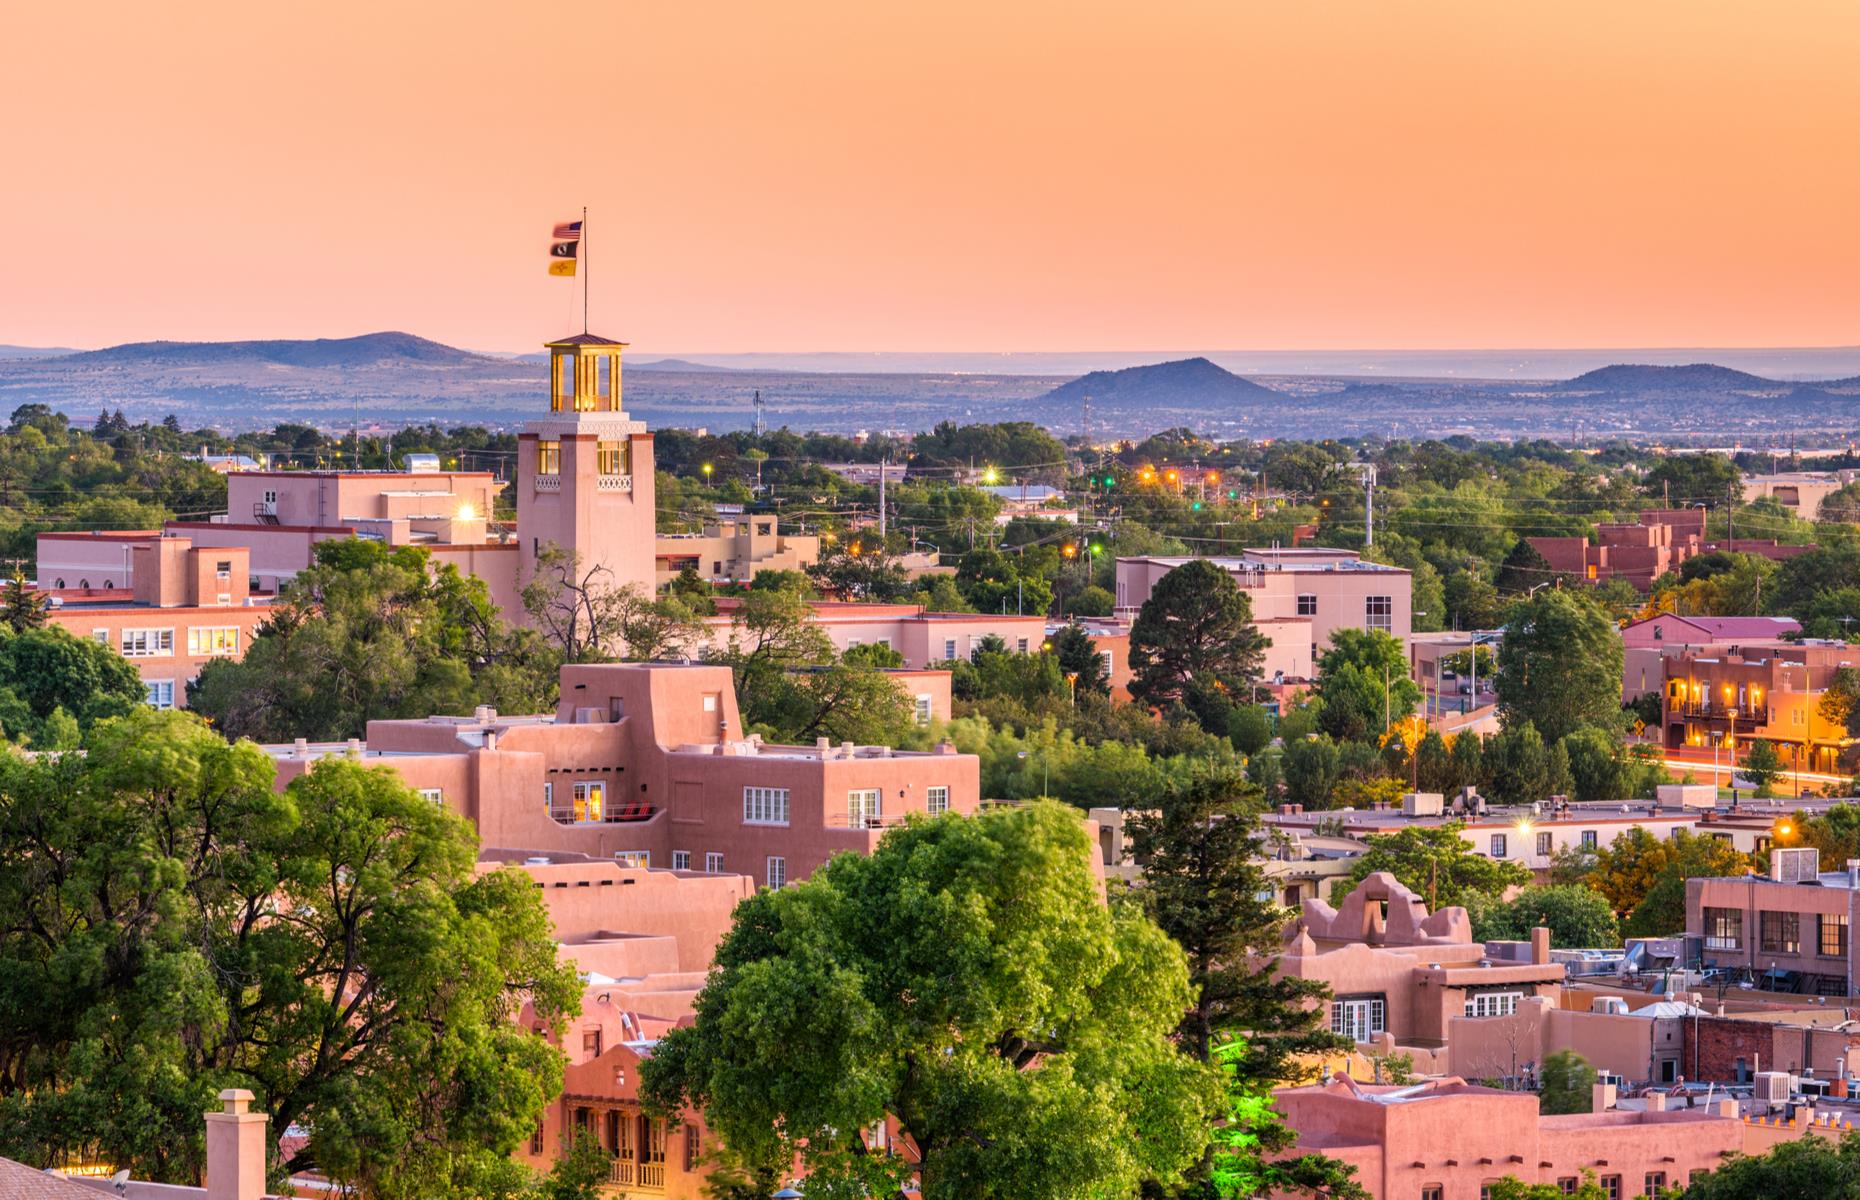 <p>Summer in New Mexico’s state capital is sizzling in every sense. The <a href="https://www.santafe.org/santa-fe-weather/">average July high</a> is 86°F (30°C), which can feel almost unbearable for visitors exploring the city’s chapels and historic plazas. This is also when the city is at its most crowded, so travelers should consider swerving the expense and stress by booking a spring trip. Average April temperatures are around 65°F (18°C) – far more pleasant conditions for exploring Pueblo-Revival architecture and contemporary art galleries.</p>